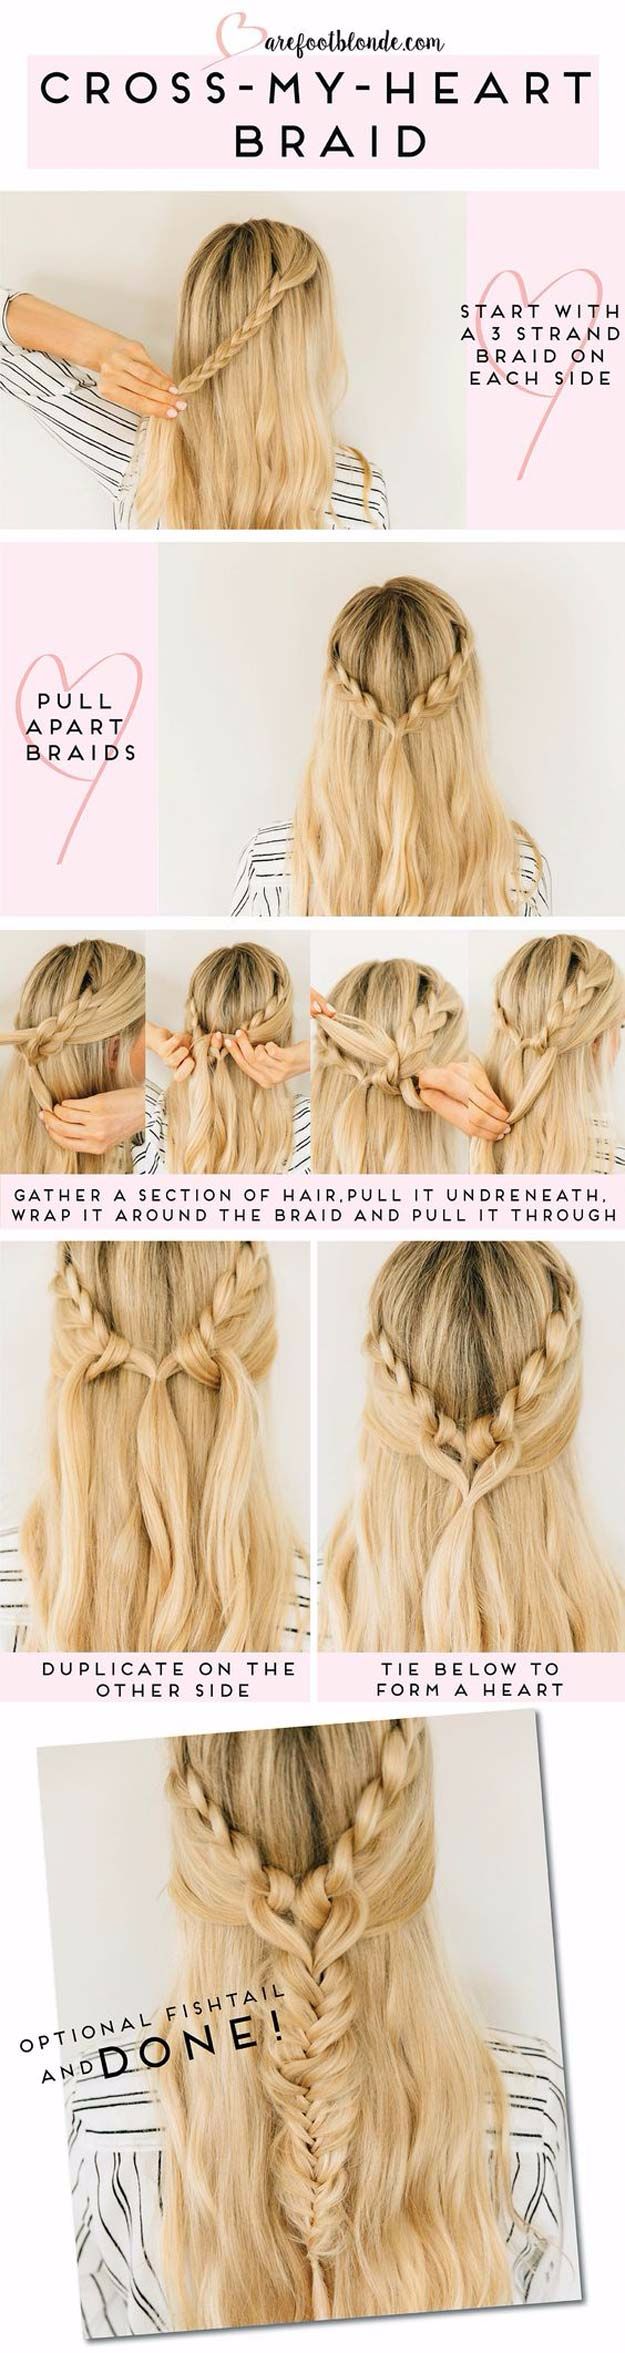 Easy Braids With Tutorials - Cross Heart Braid - Cute Braiding Tutorials for Teens, Girls and Women - Easy Step by Step Braid Ideas - Quick Hairstyles for School - Creative Braids for Teenagers - Tutorial and Instructions for Hair Braiding